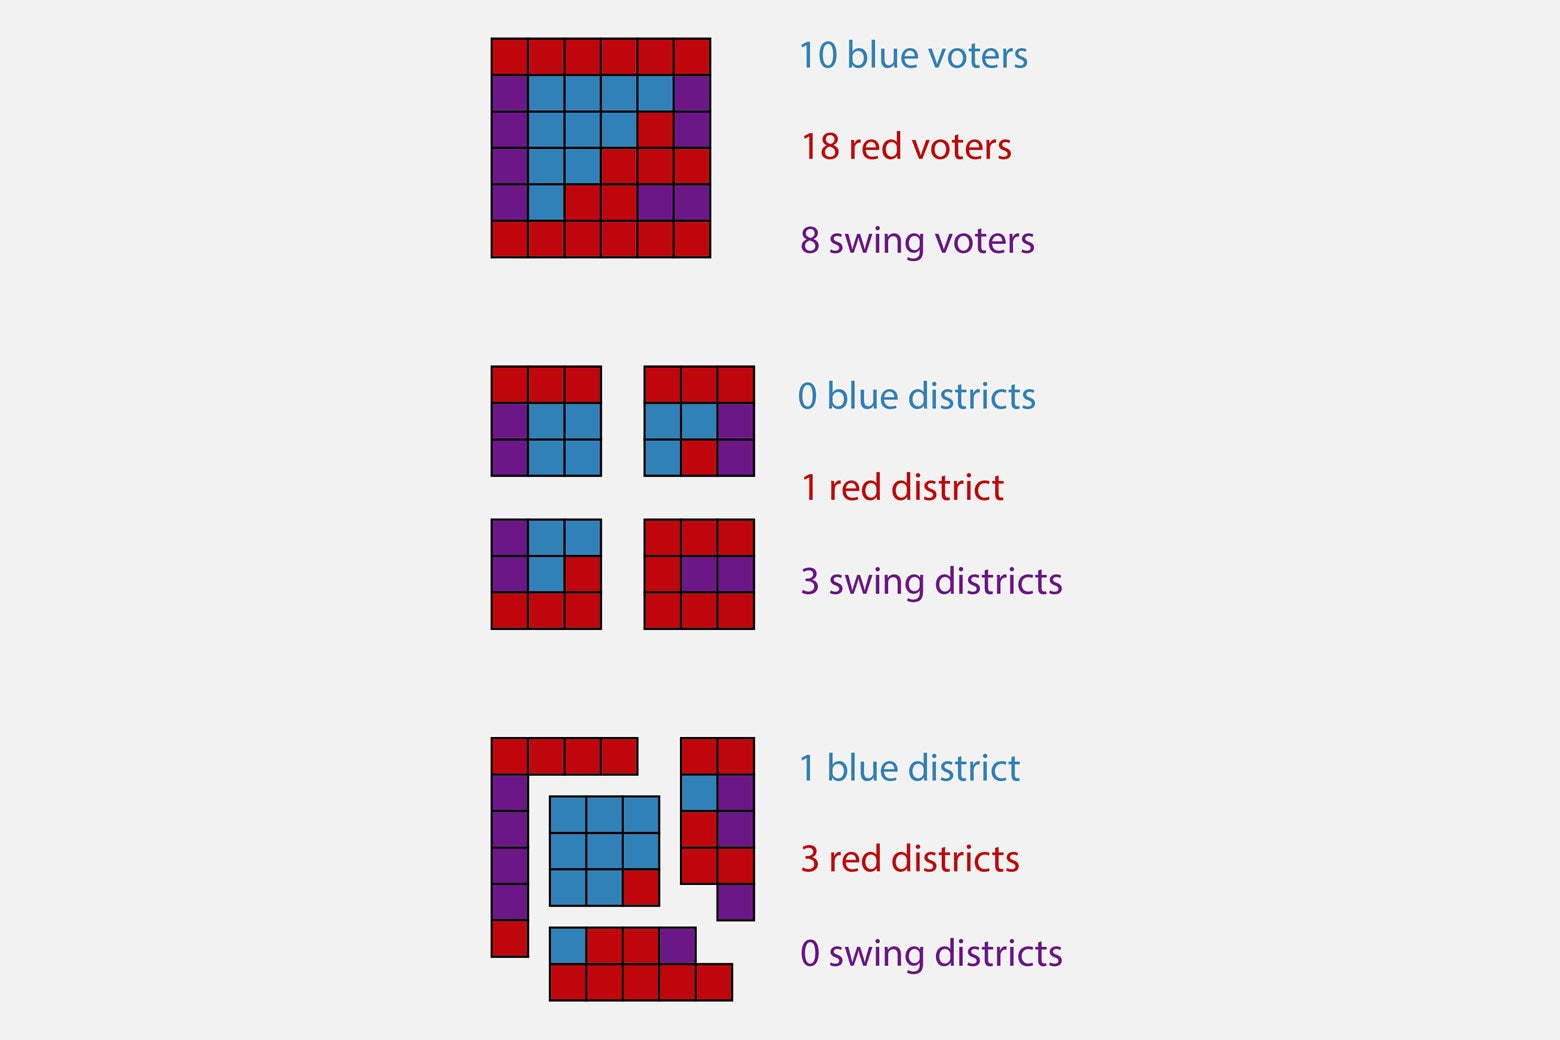 Top: Grid with 10 blue voters, 18 red voters, 8 swing voters. Middle: Grid divided up into 0 blue districts, 1 red district, 3 swing districts. Bottom: Grid divided up into 1 blue district, 3 red districts, 0 swing districts.